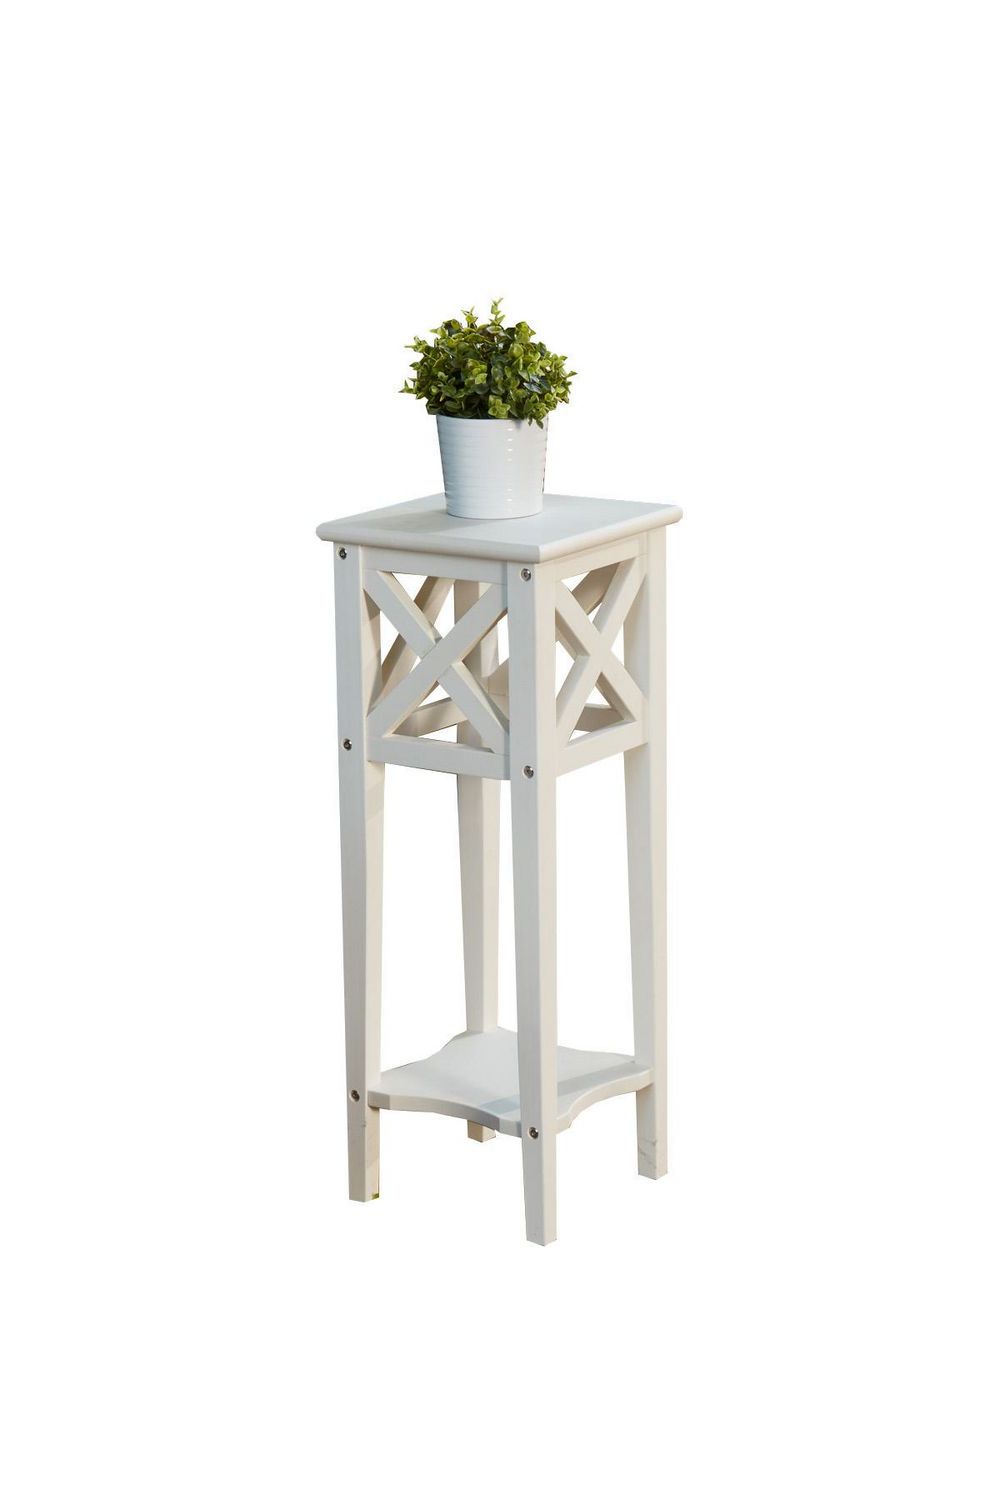 Best And Newest White Plant Stands Within Leisure Design White Ivy Plant Stand (View 11 of 15)